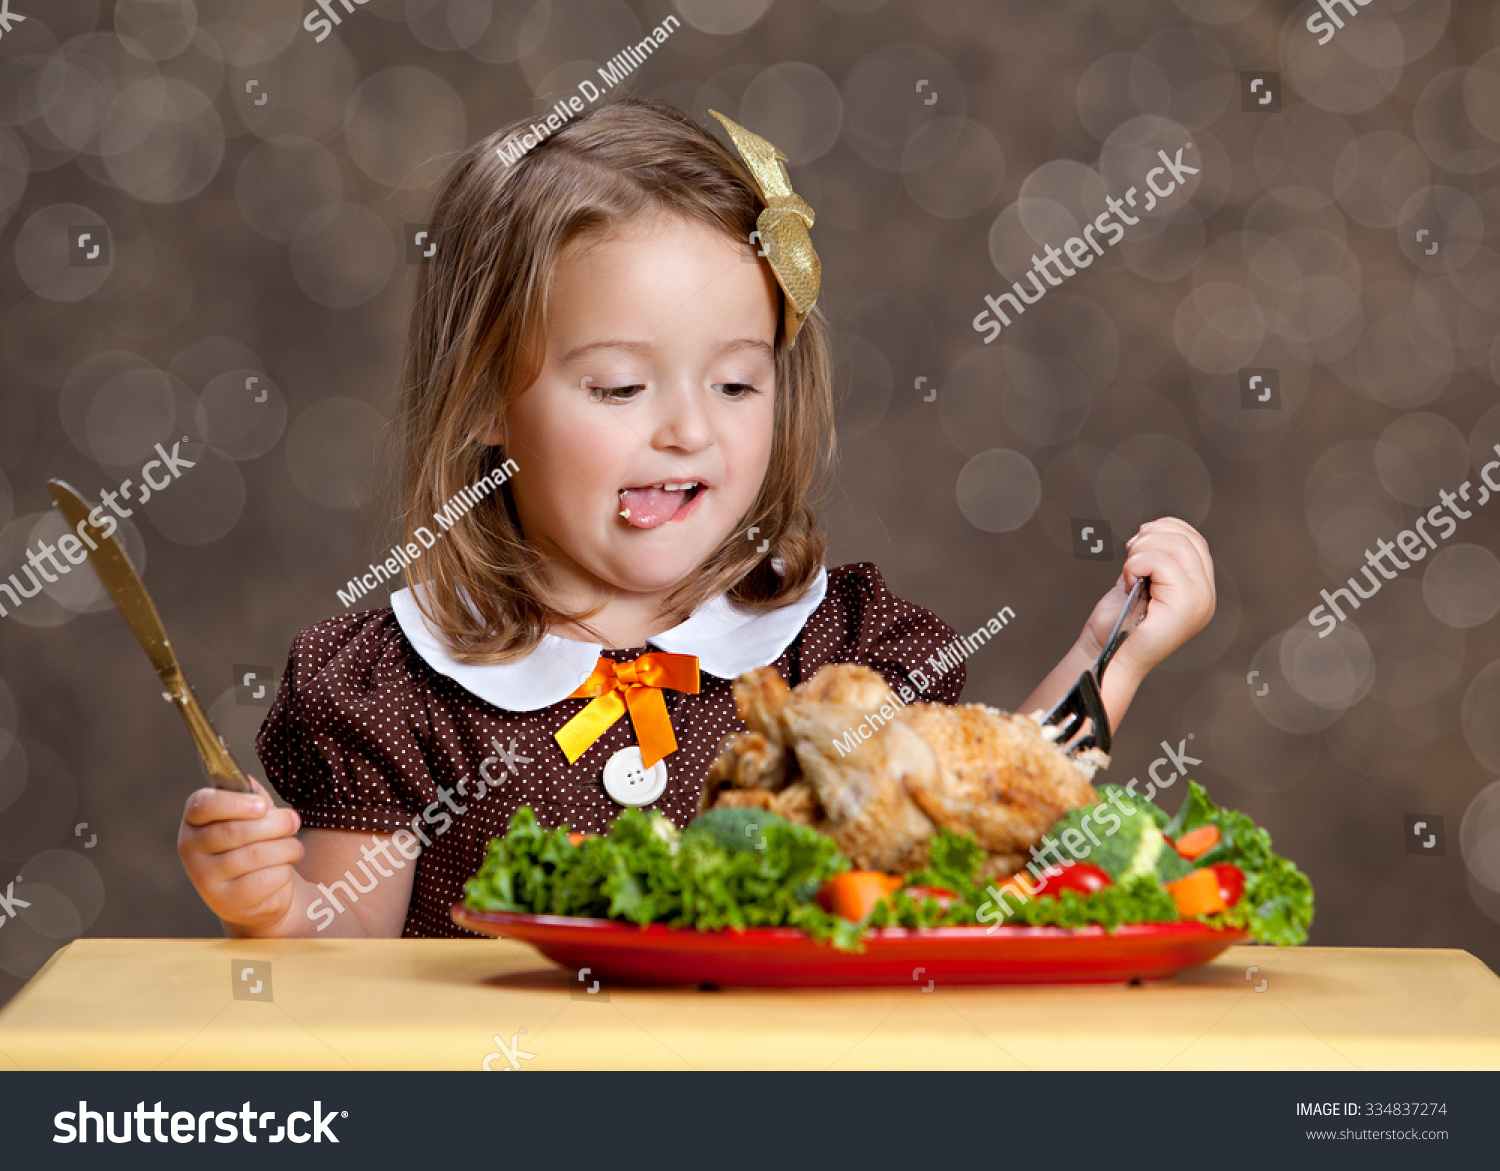 Thanksgiving Dinner. Adorable Little Girl Sitting At A Small Table With ...